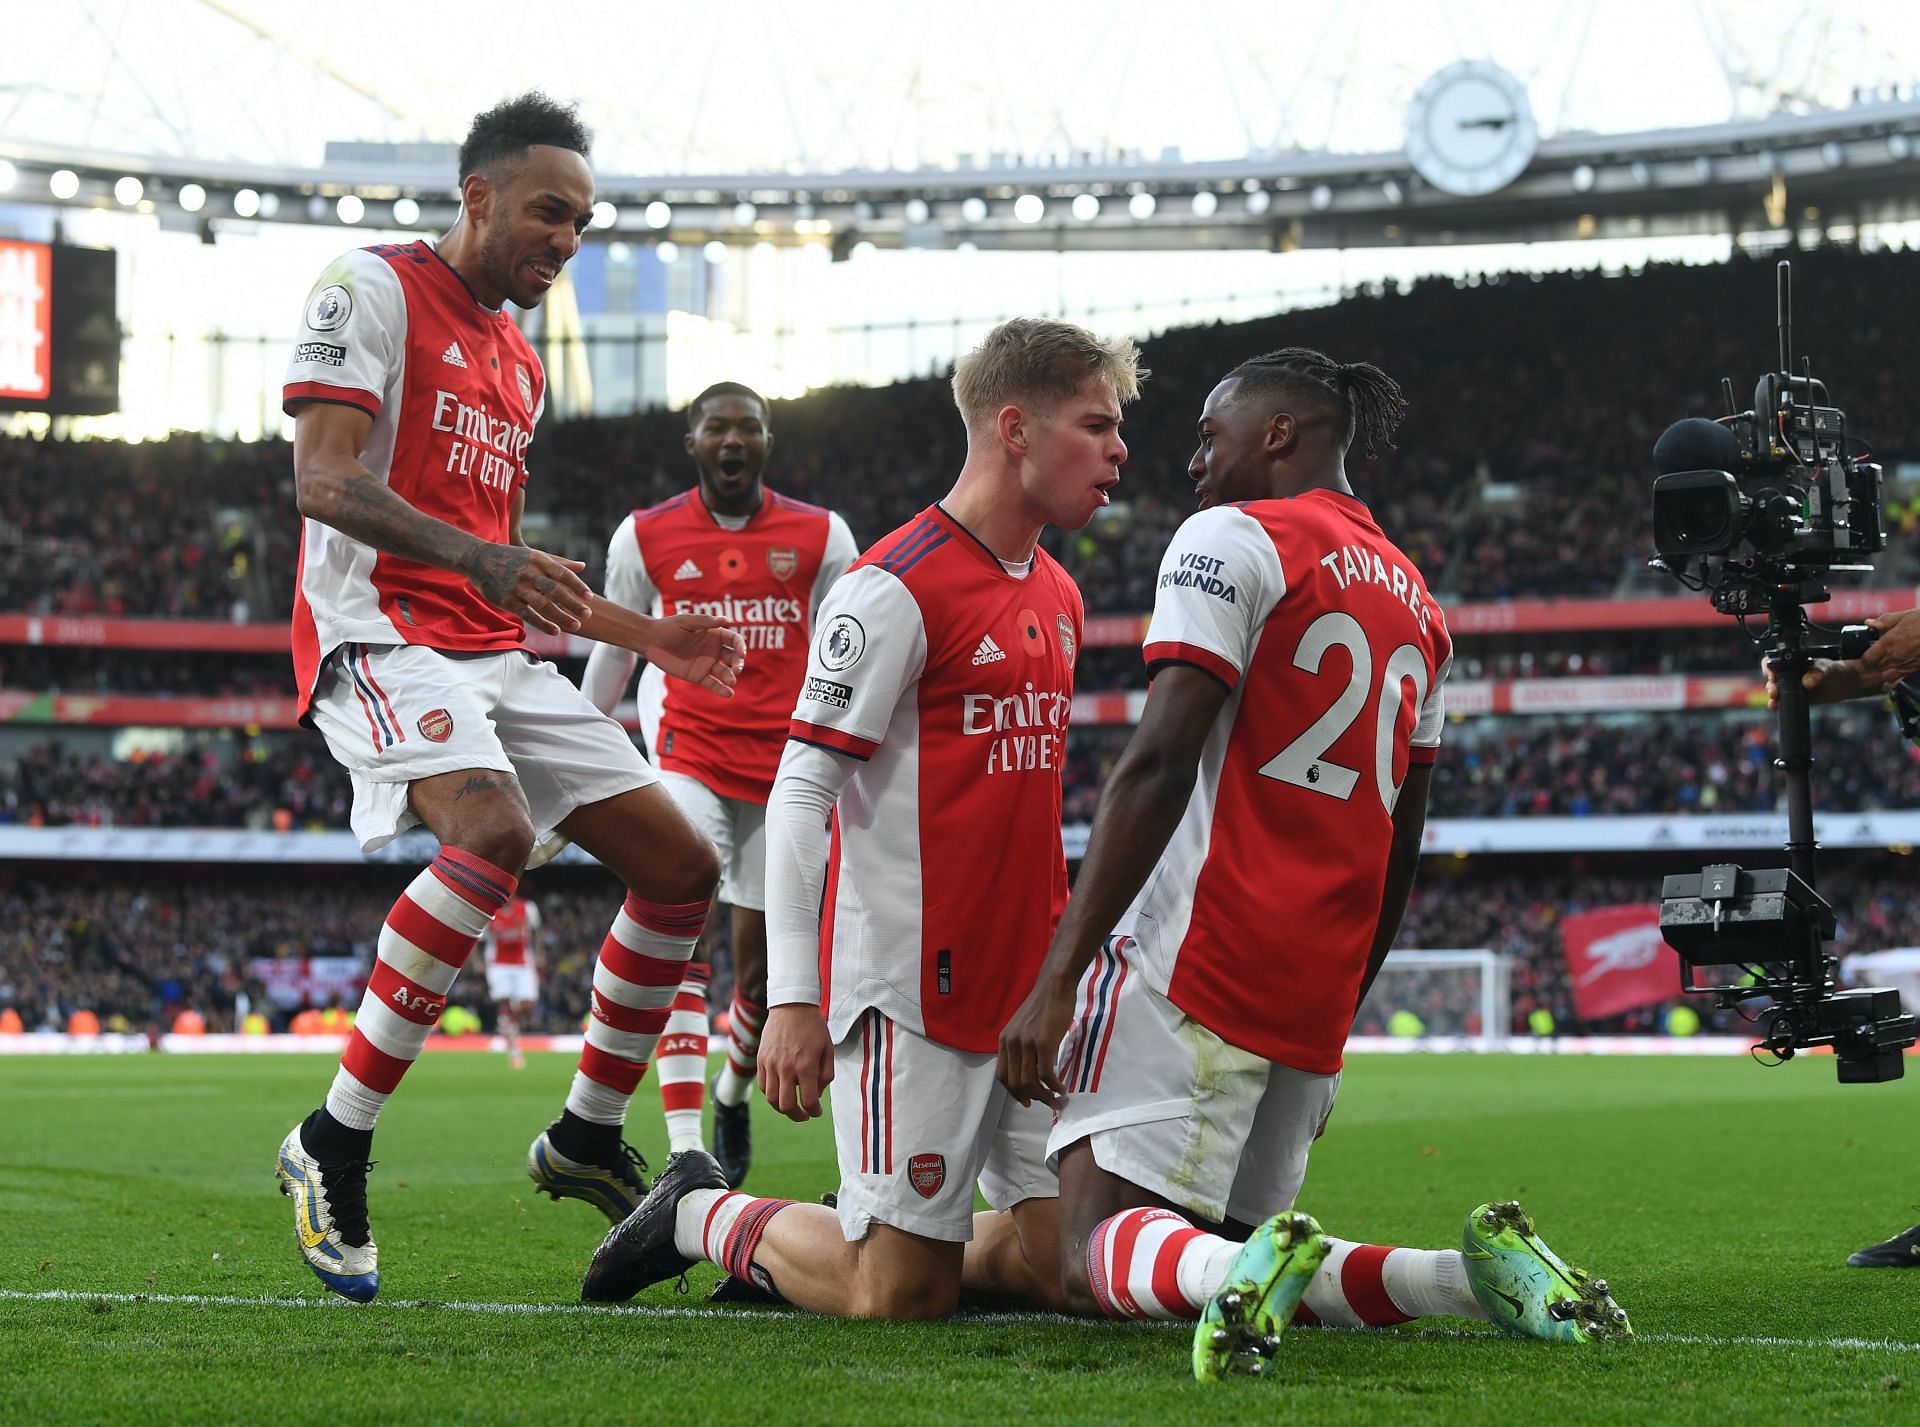 Arsenal have extended their unbeaten run to 10 matches after beating Watford